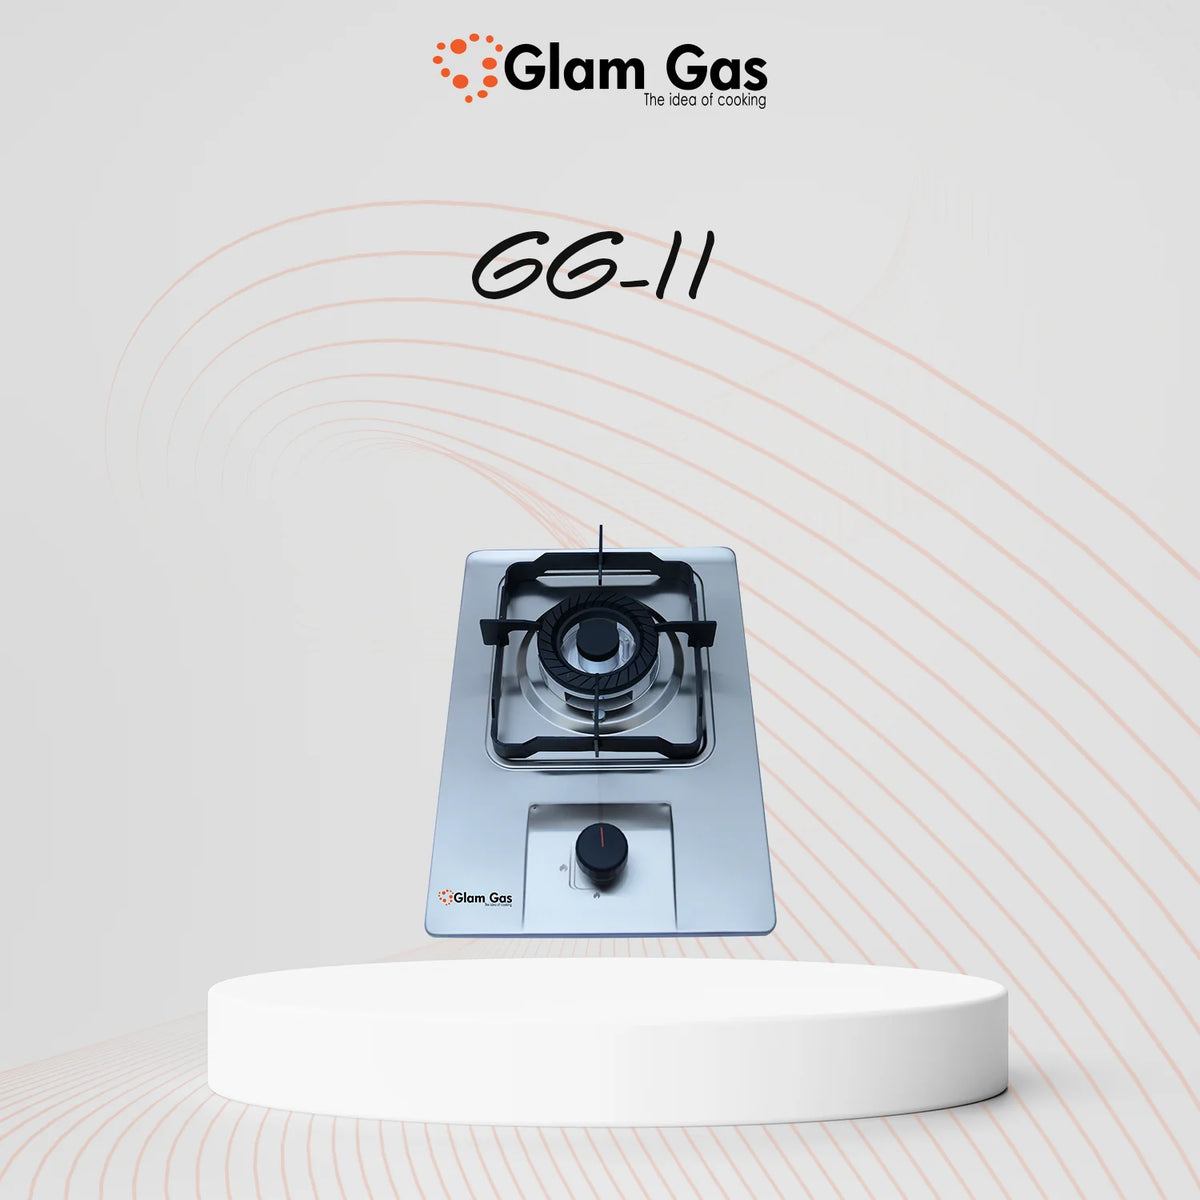 Glam Gas Food book-GG-11 Hob |1 Burner | Kitchen Gas Stove | Gas Stove  1 Year Brand Warranty